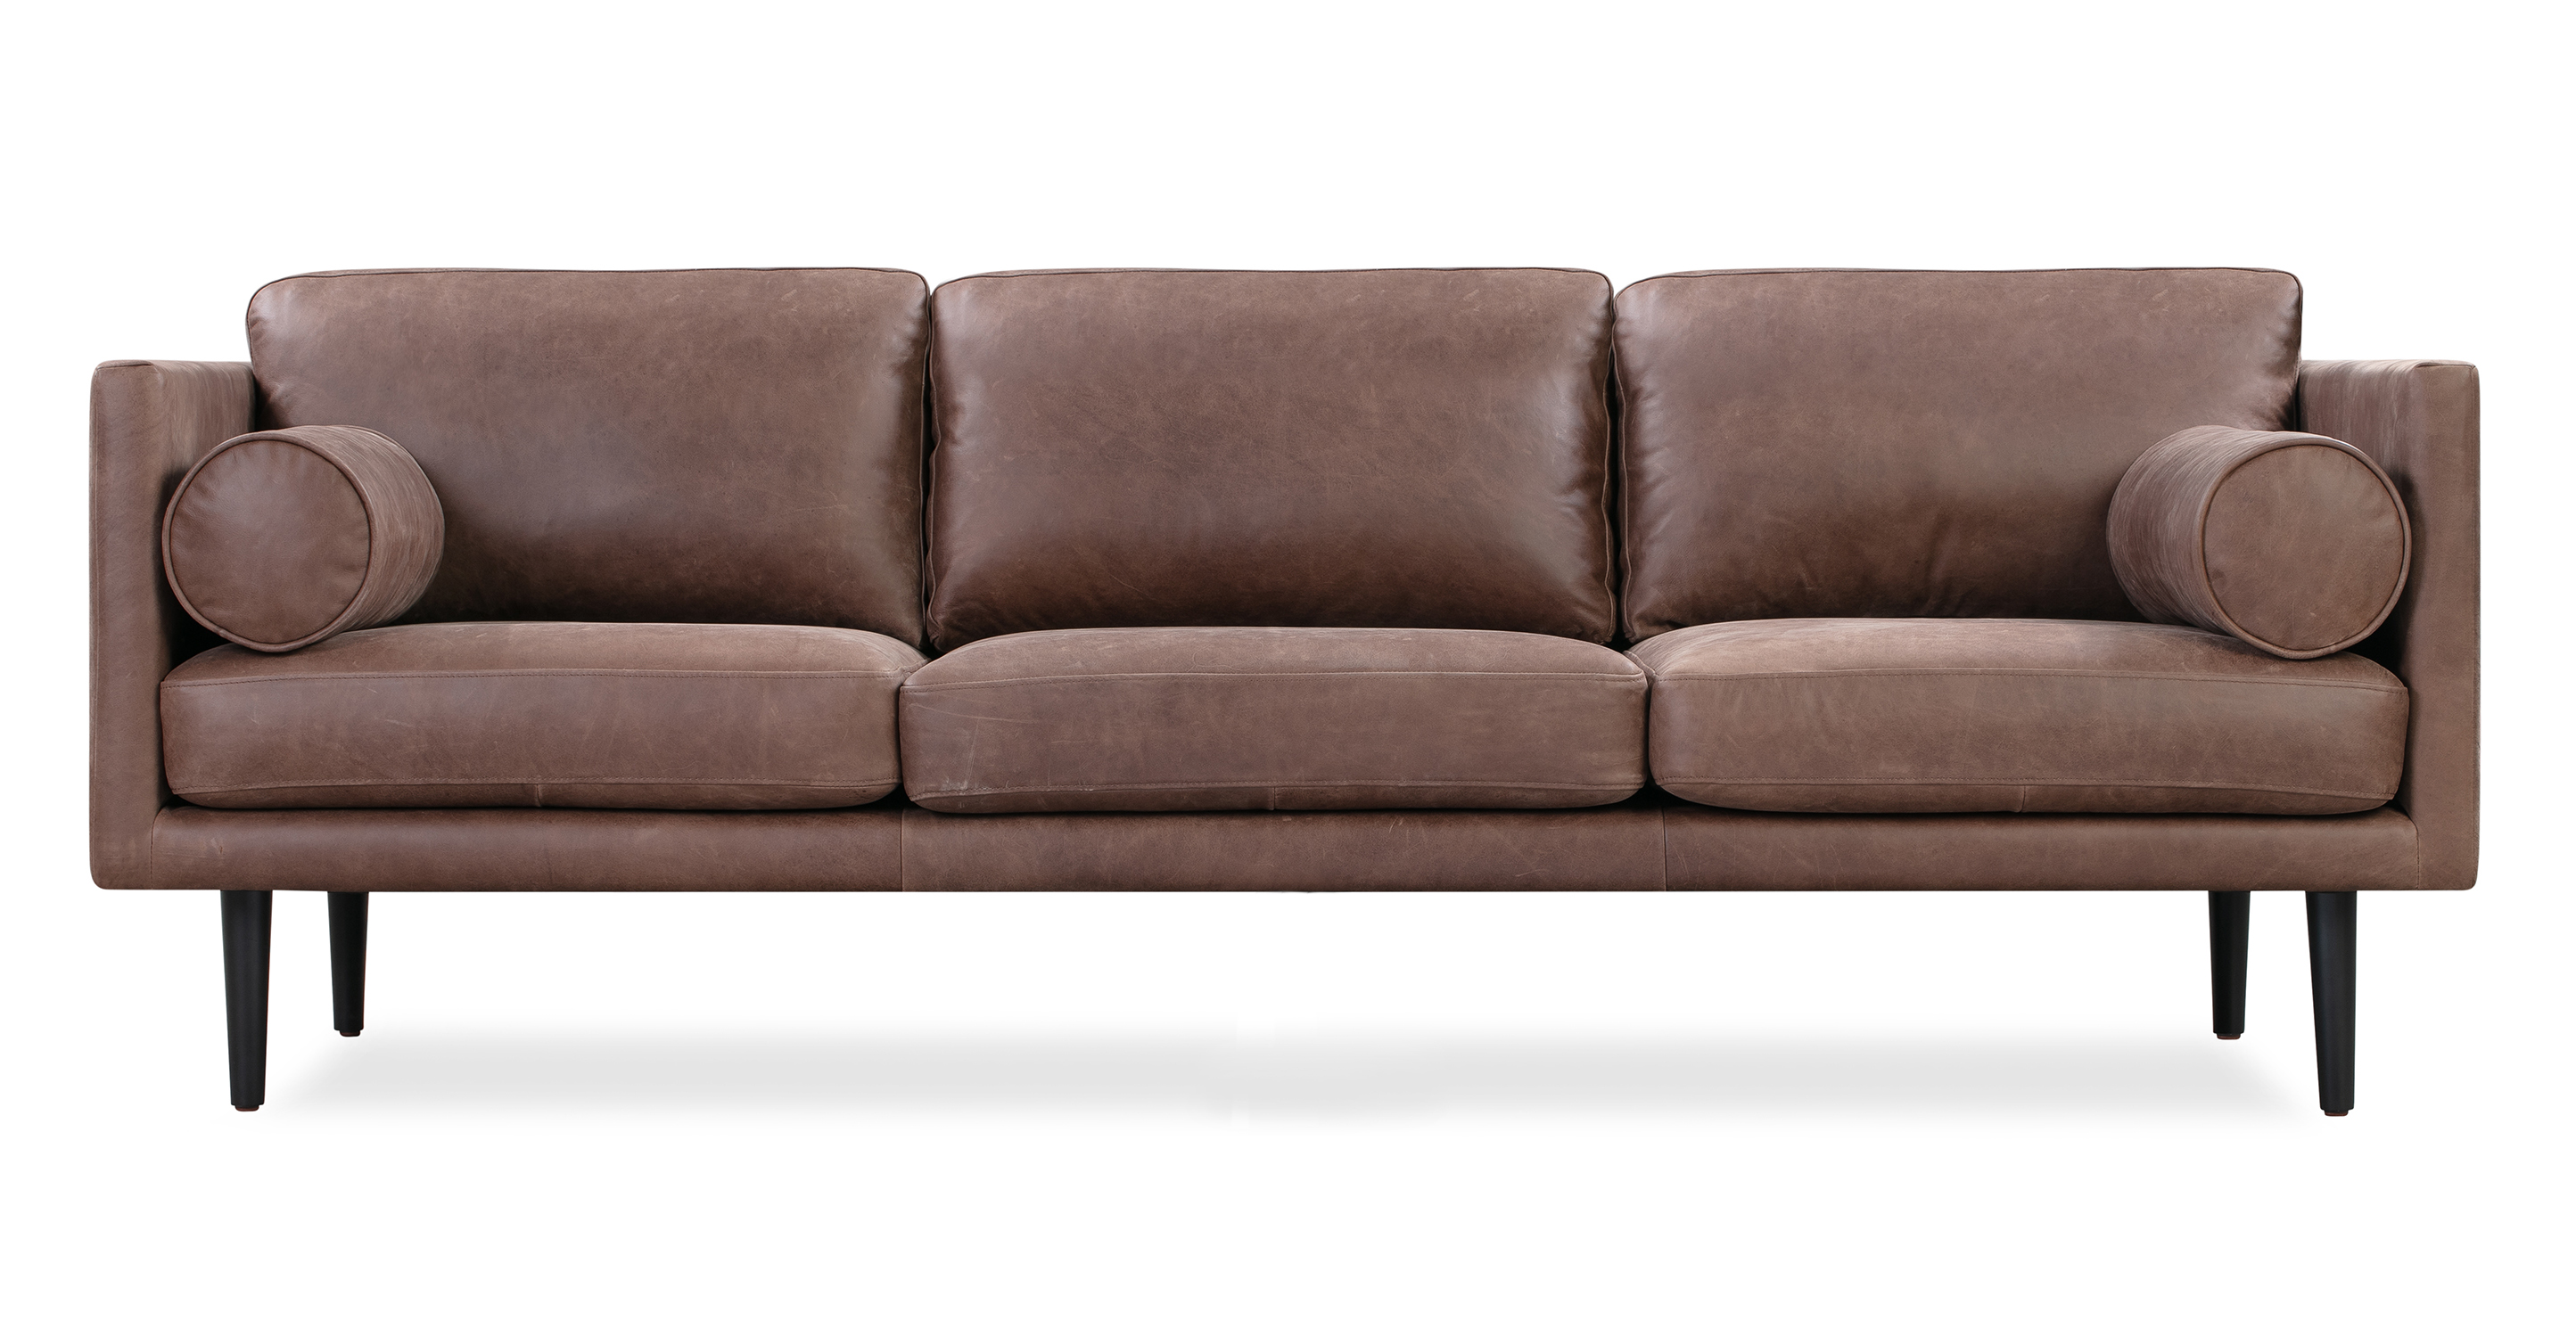 The Spectre Mocha Brown Leather is a timeless contemporary sofa that is 100% upholstered. It features a cohesive design with both the base frame and arms sharing the same thickness, resulting in a harmonious and consistent look. The sofa's three seat and back cushions are removable and strike a balance between being well-cushioned and not overly stuffed. To further enhance comfort, the Spectre includes two bolster pillows positioned on either side of the arm. The sofa is raised by tapered wooden legs.